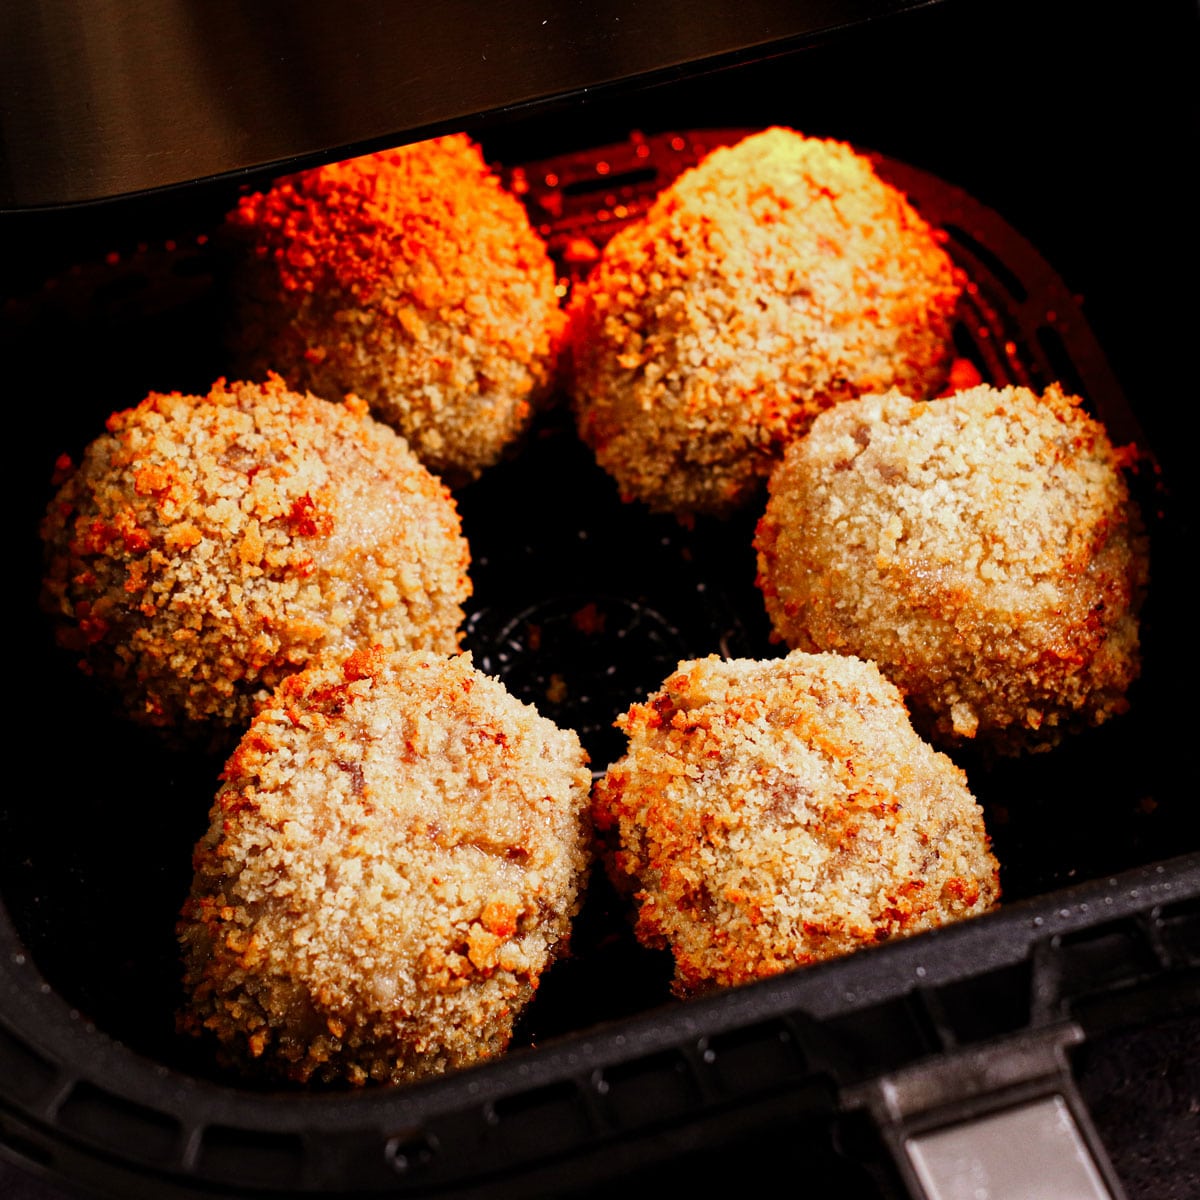 Cooking scotch eggs in air fryer